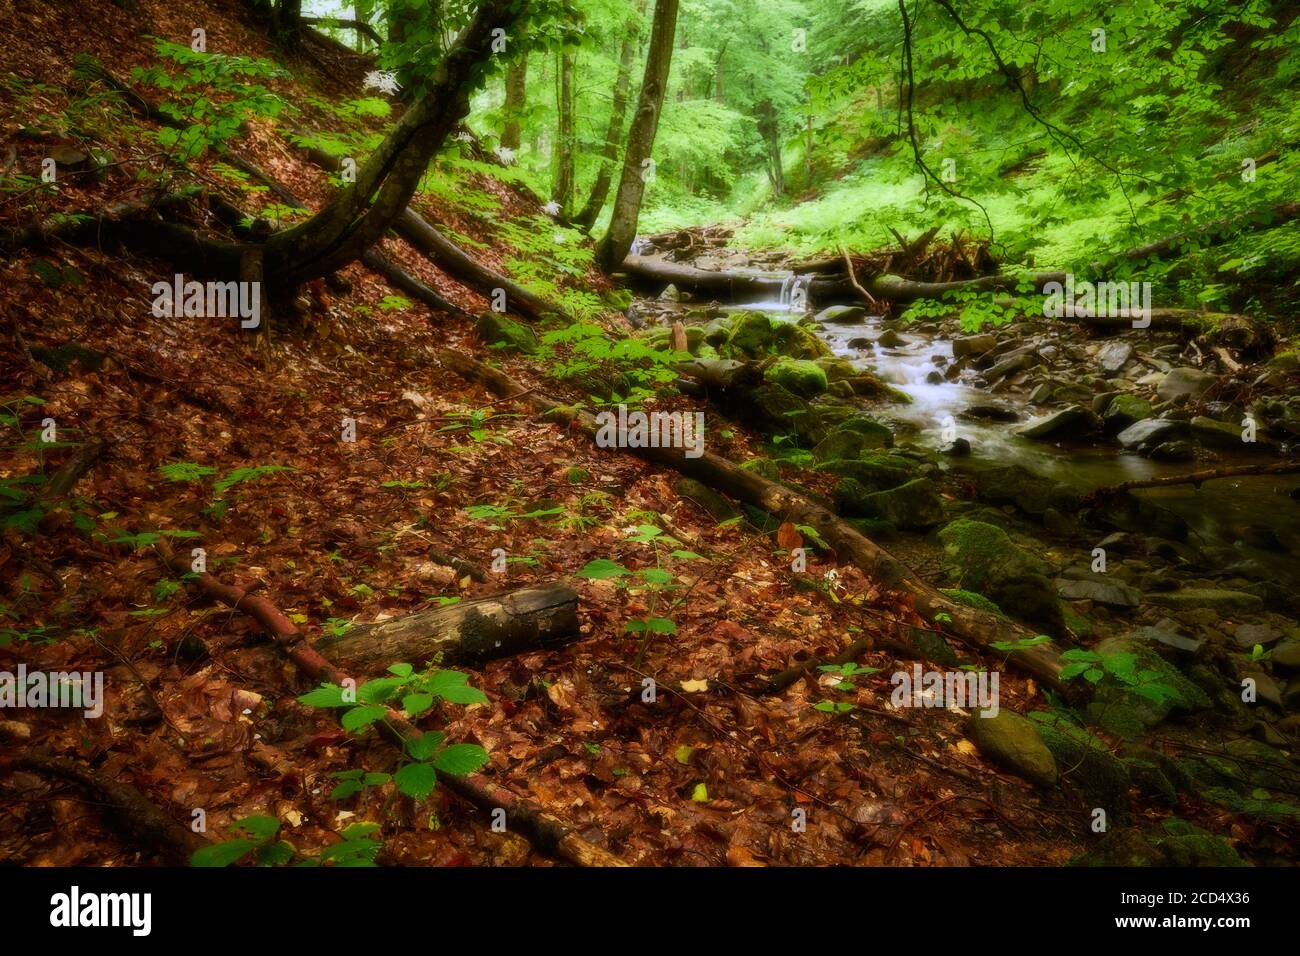 Dreamlike forest. Psychedelic woodland scene from the Carpathian Mountains Stock Photo